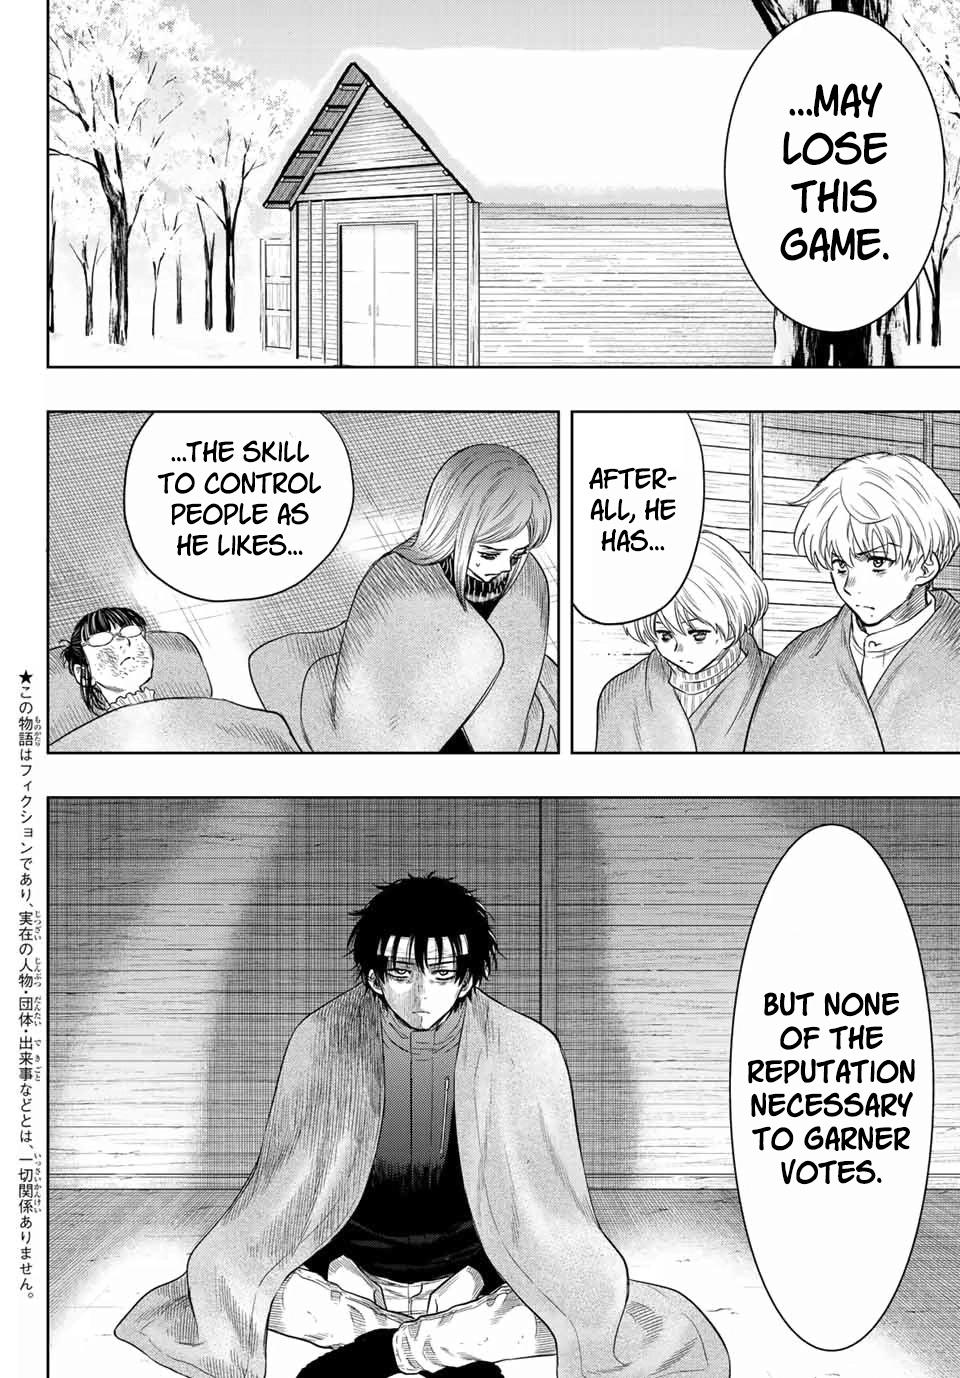 Read Tomodachi Game Chapter 112: The Concluding Vote on Mangakakalot